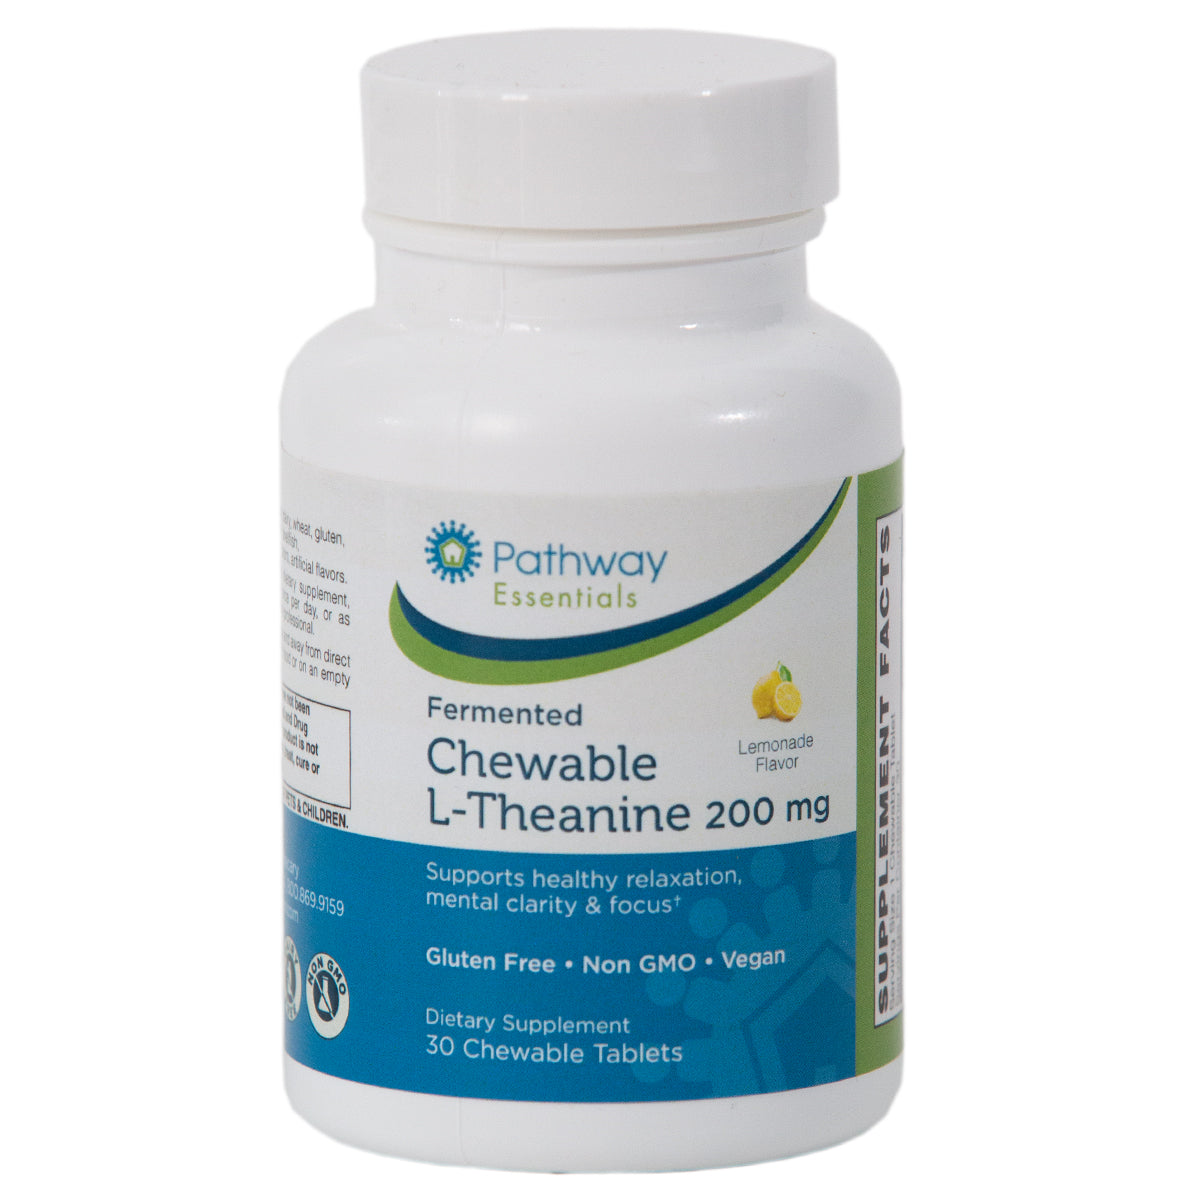 Chewable L-Theanine 200 MG